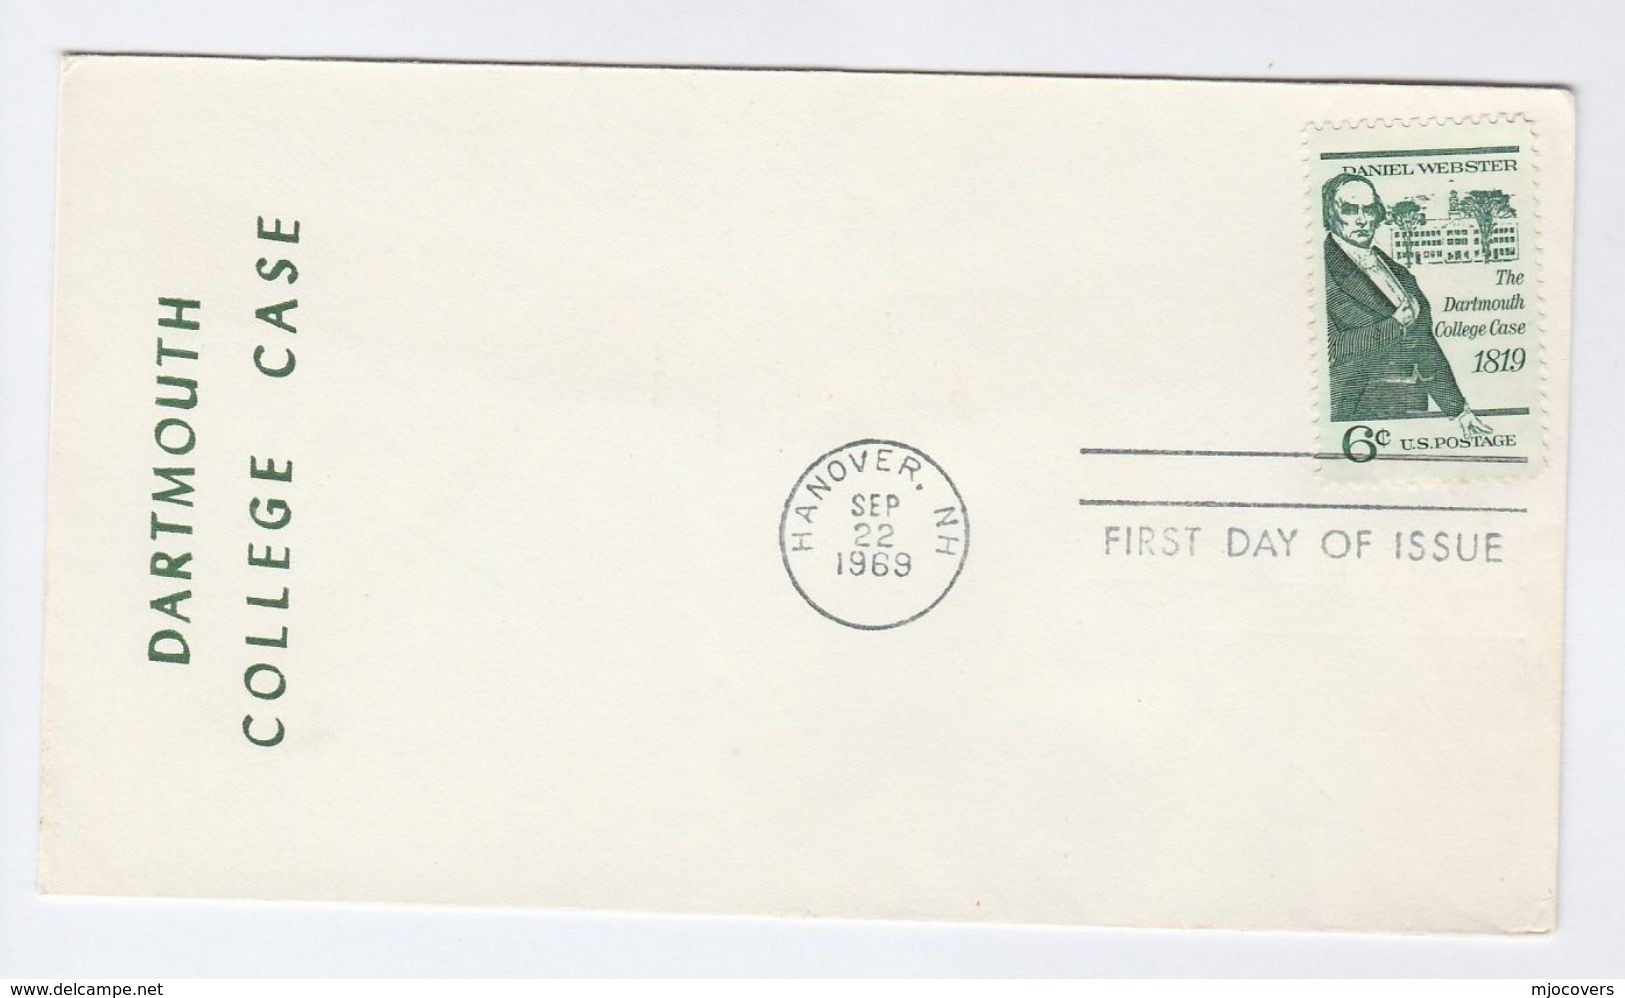 1969 Hannover Nh USA FDC DARTMOUTH COLLEGE Stamps Cover - 1961-1970